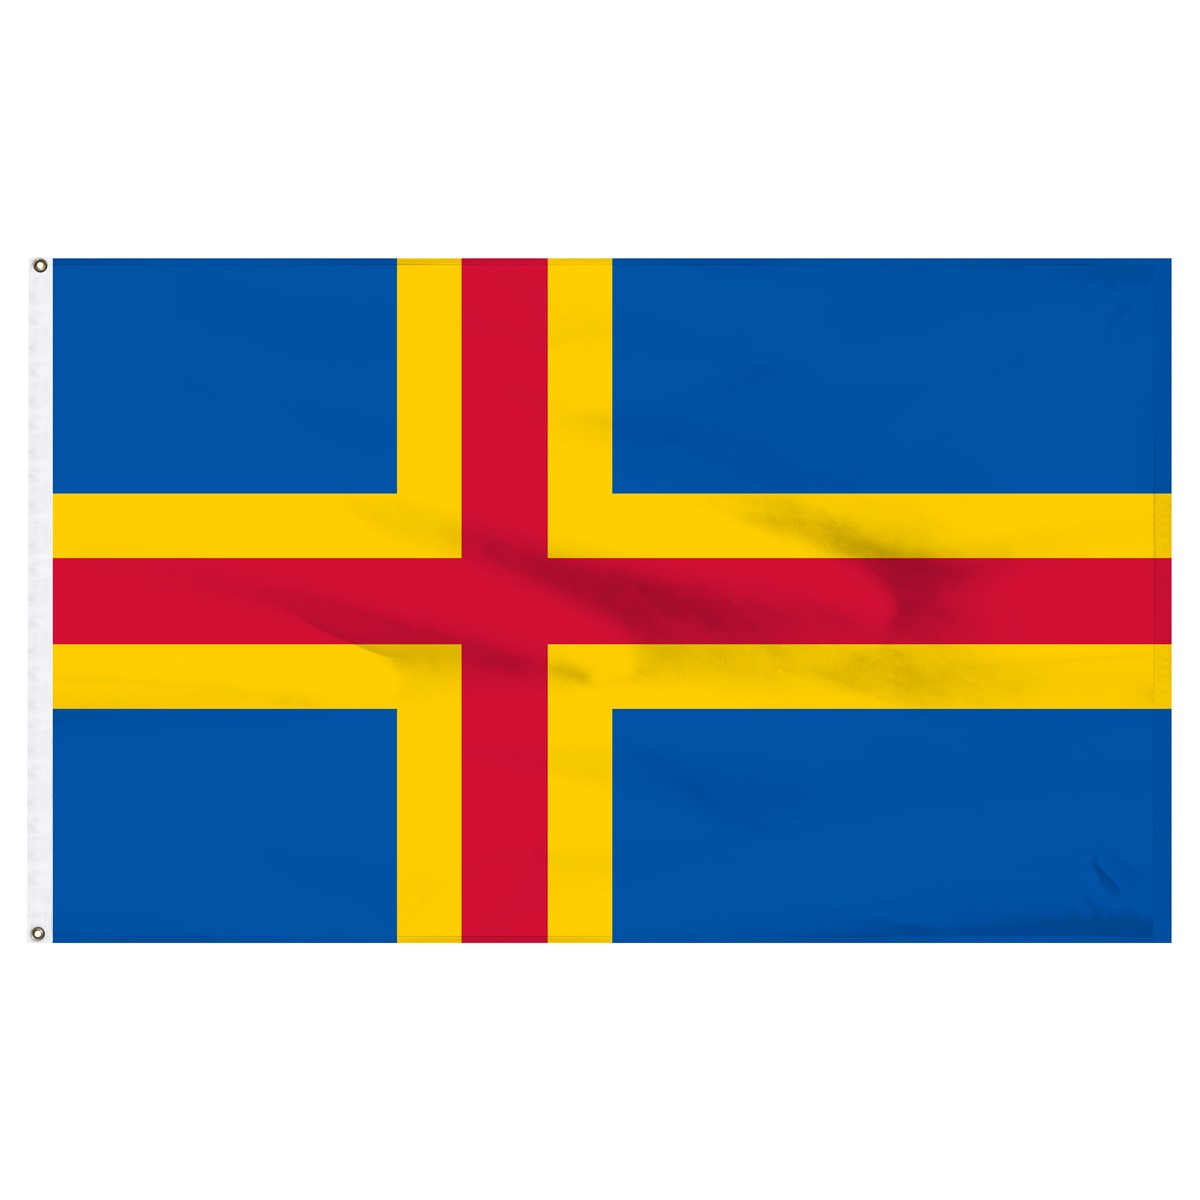 Aland Islands Submit Flags and Flags